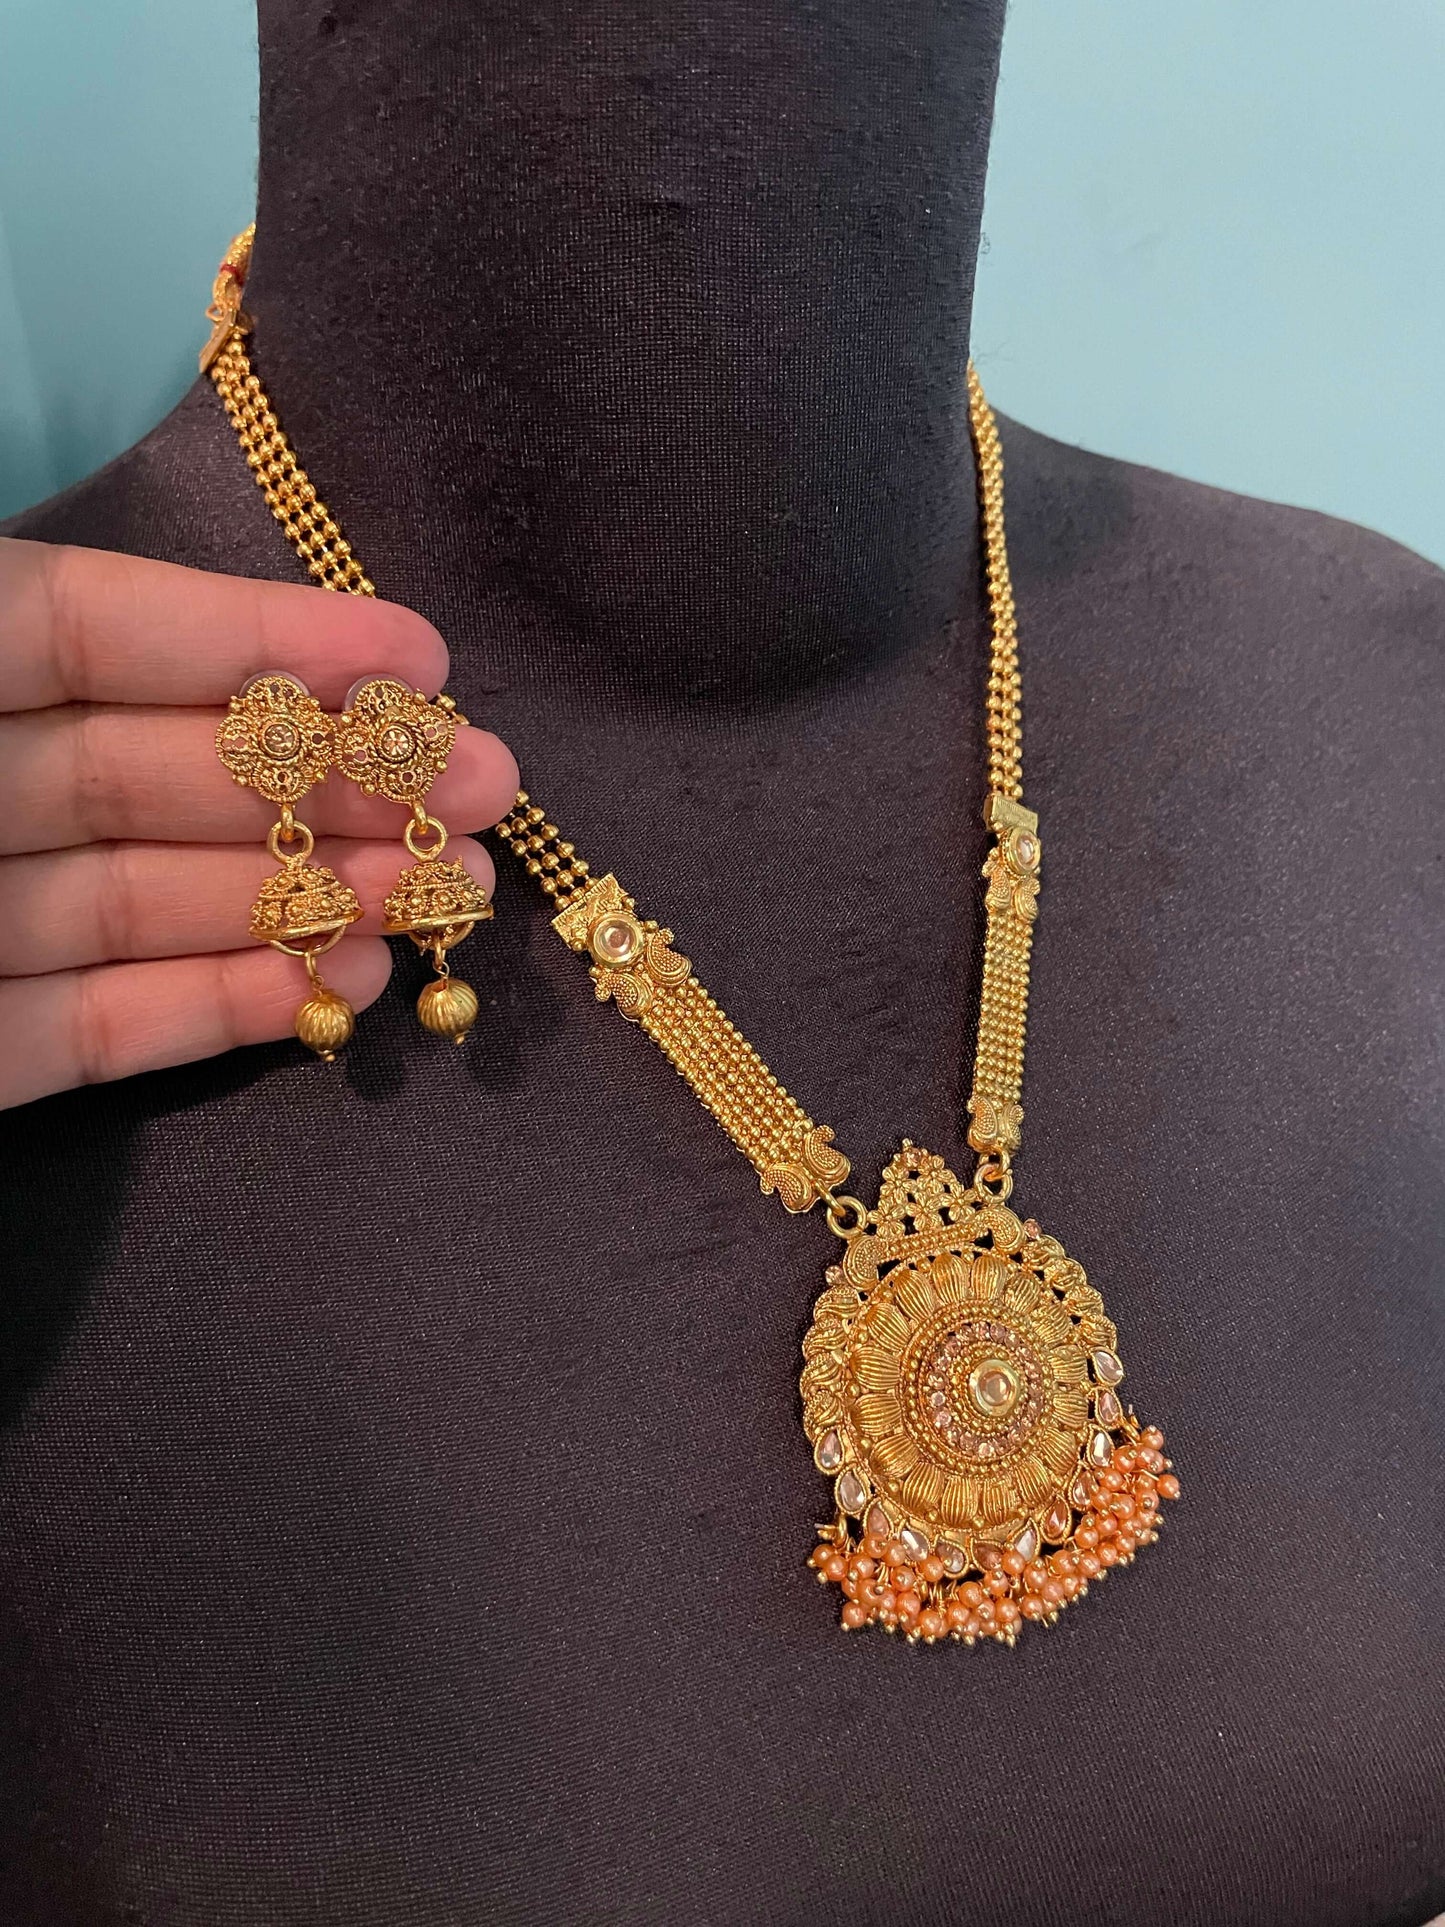 Ethnic Indian/African necklace earrings women jewelry set